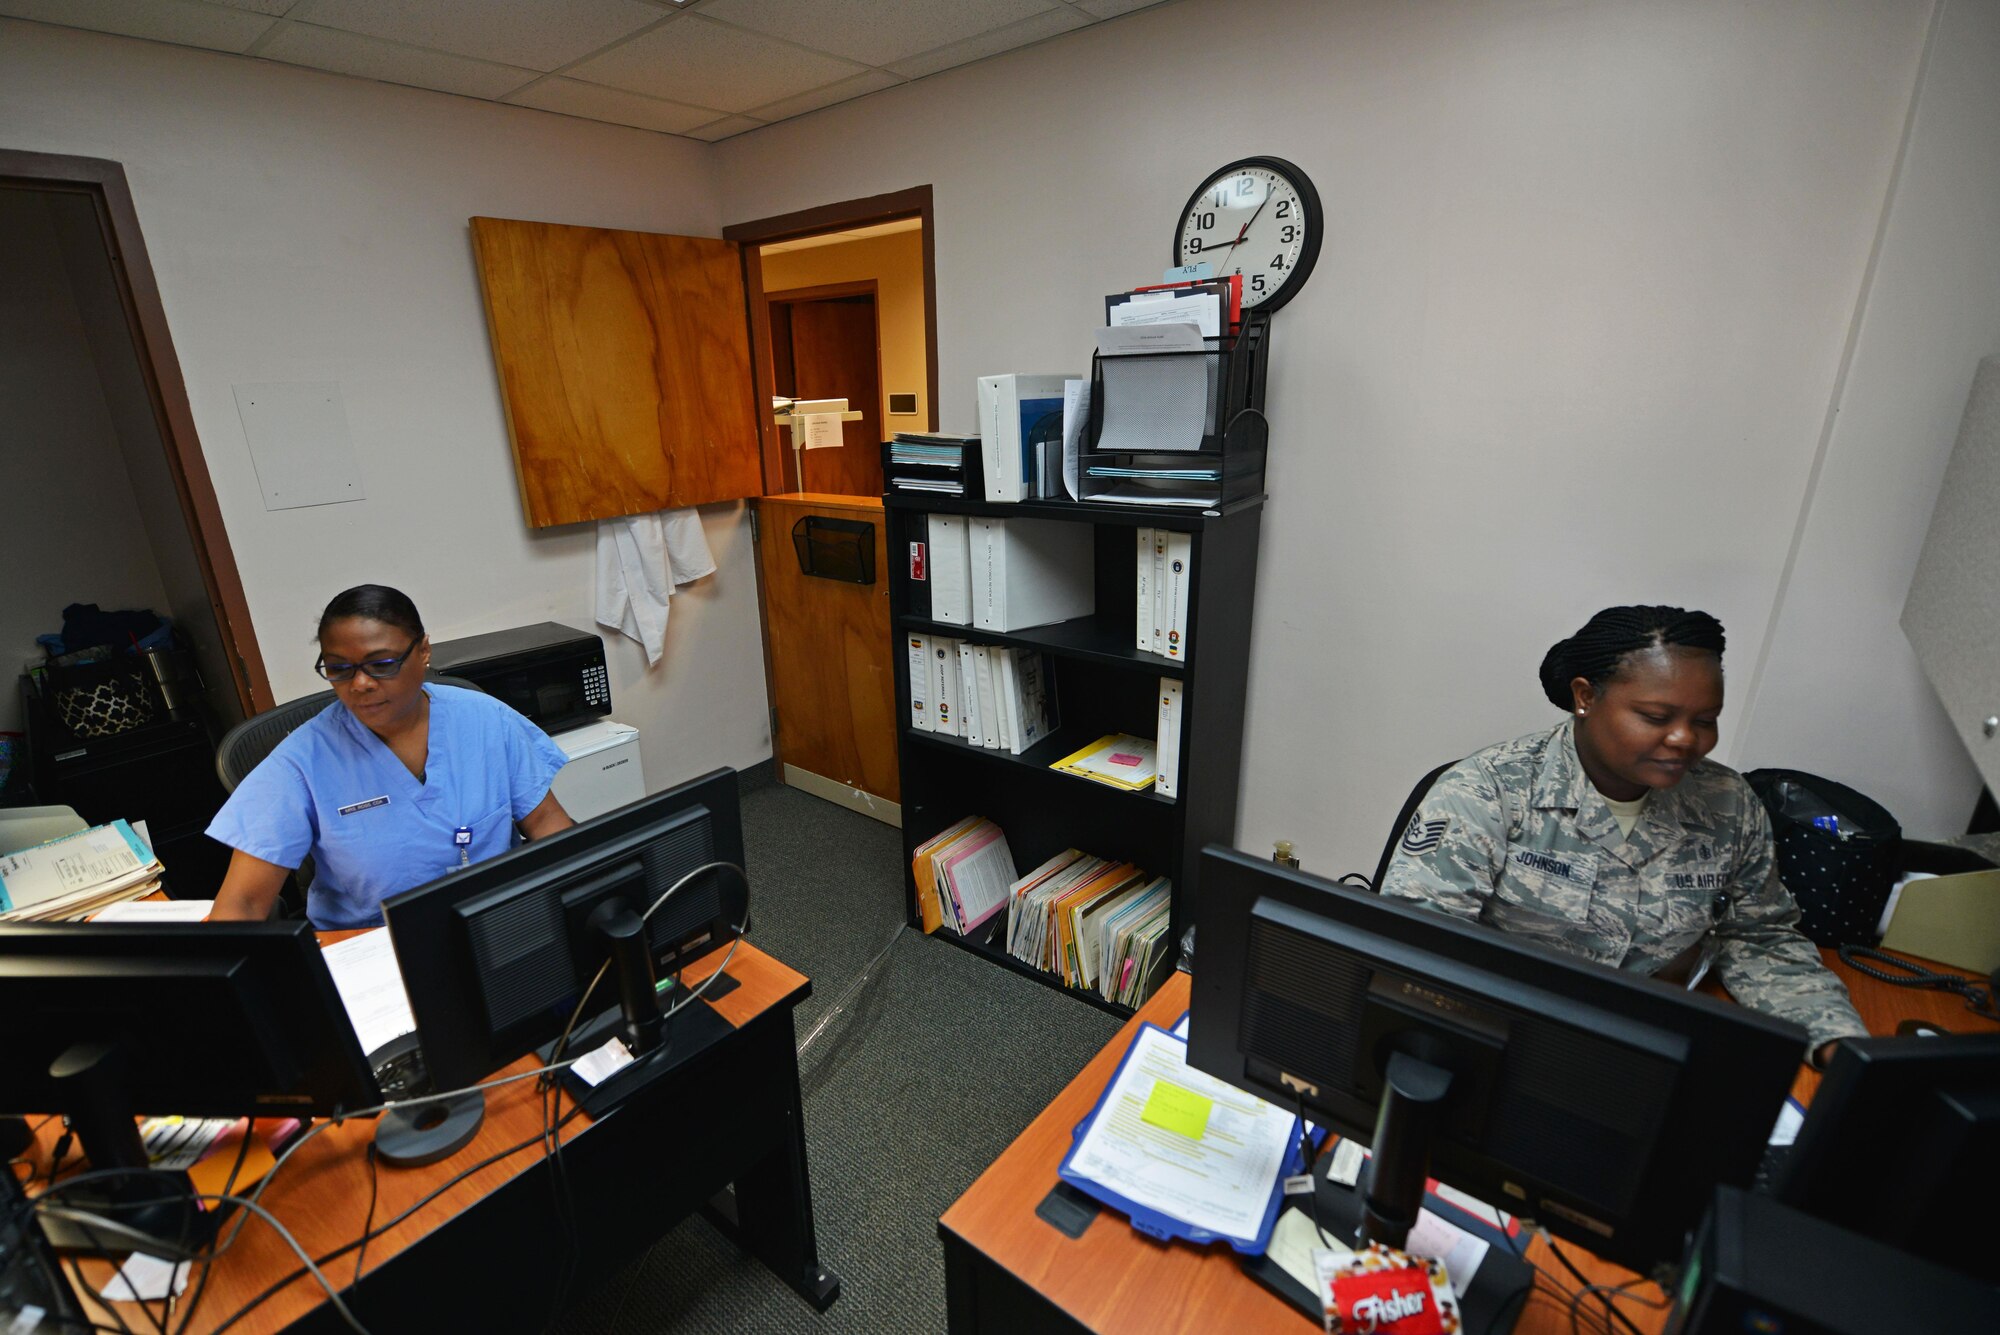 U.S. Air Force Tech. Sgt. Deonna Johnson, 20th Dental Squadron (DS) records and reception noncommissioned officer in charge, right, templates and sends out record requests while Beverly Ross, 20th DS active duty dental program referral manager, works on referrals at Shaw Air Force Base, S.C., May 18, 2017. Part of the dental support flight, Johnson acts as a liaison between the 20th DS and unit deployment managers, ensuring annual appointments are scheduled for every service member. Ross is responsible for all dental referrals to off-base clinics, ensuring Team Shaw members get the care they need. (U.S. Air Force photo by Airman 1st Class Destinee Sweeney)